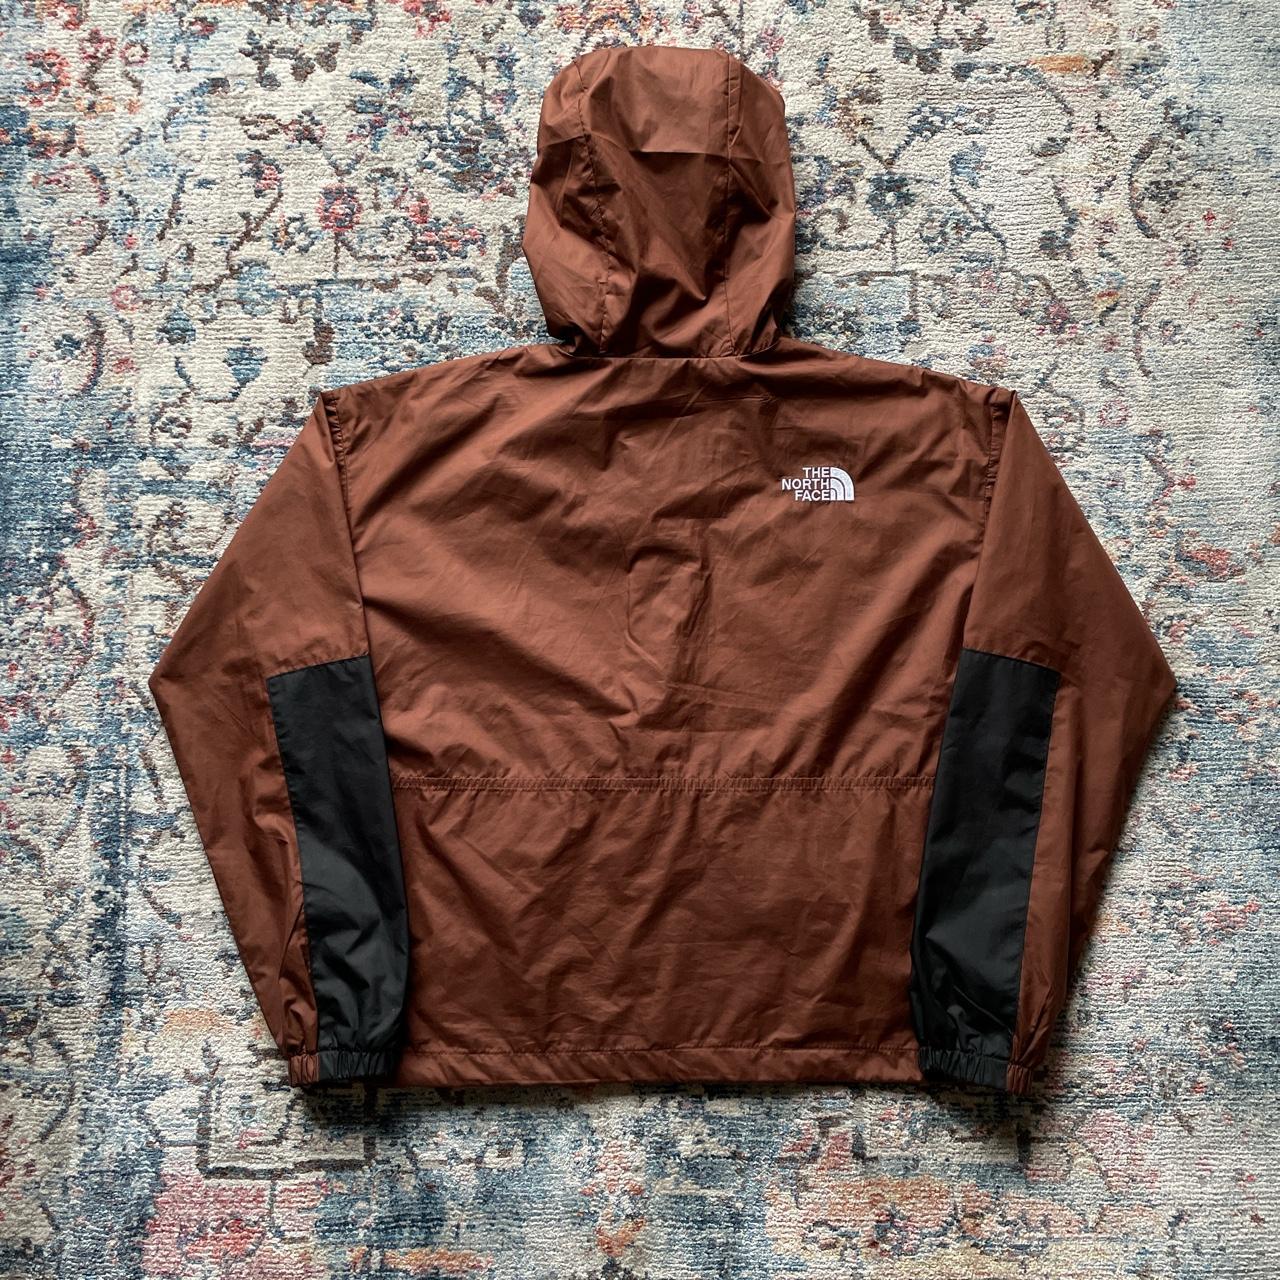 The North Face Brown and Black Jacket